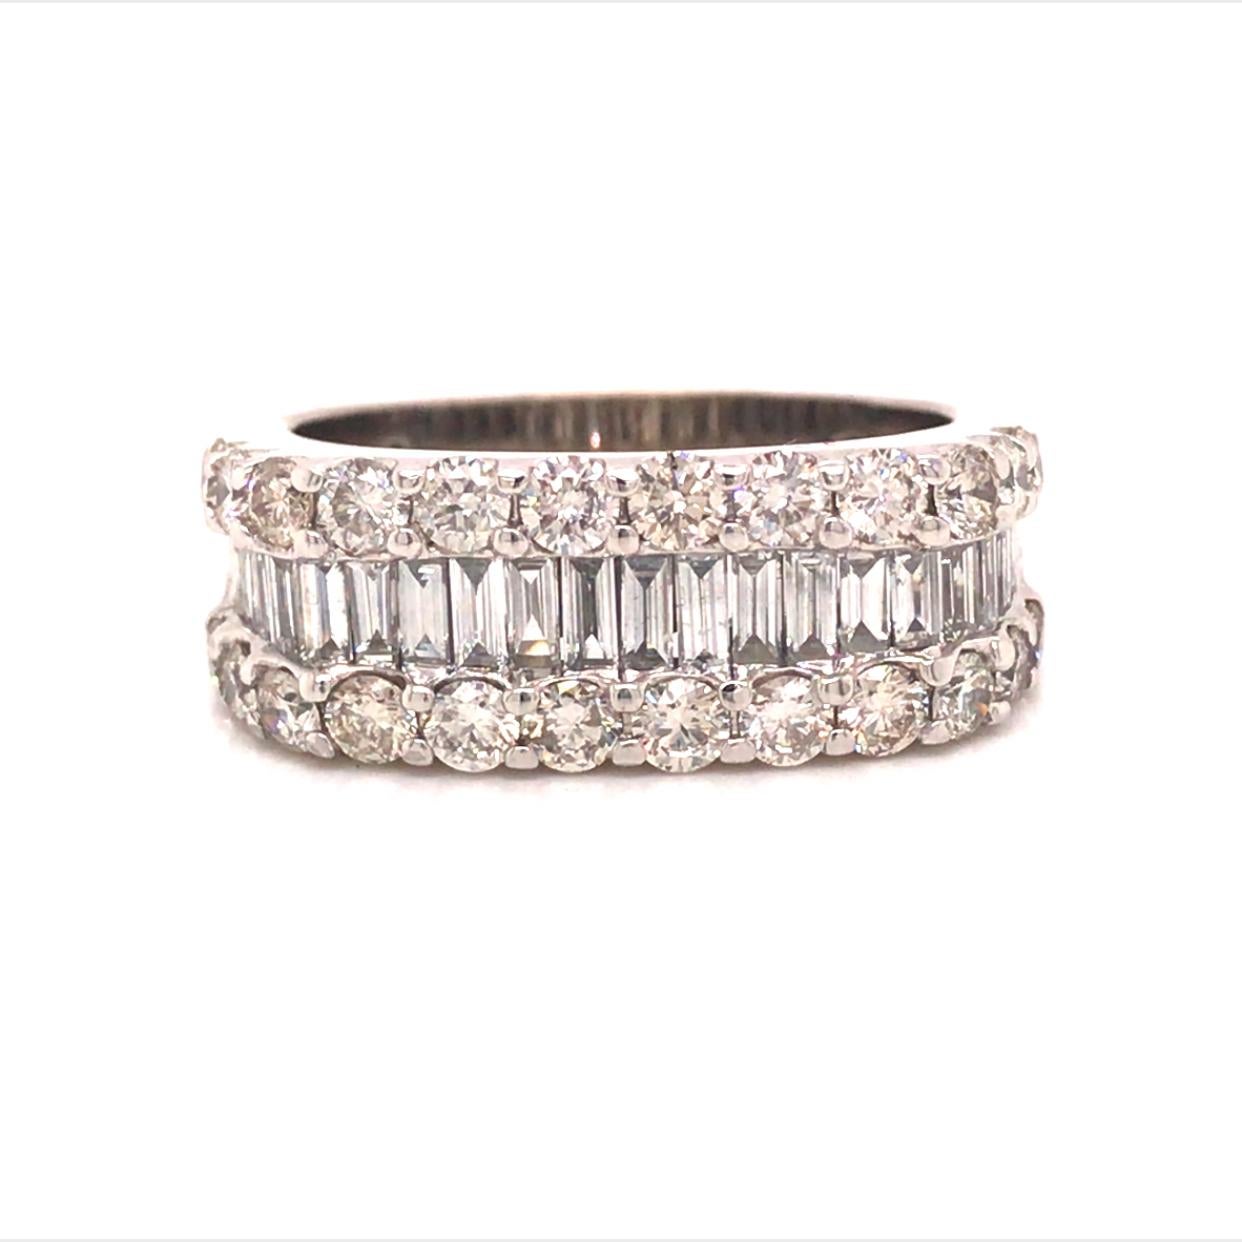 Round and Baguette Diamond Band in 14K White Gold.  (24) Round Brilliant Cut and (20) Baguette Diamonds weighing 3.03 carat total weight, G-H in color and VS-SI in clarity are expertly set.  The Ring measures 3/8 inch in width.  Ring size 9.  7.45